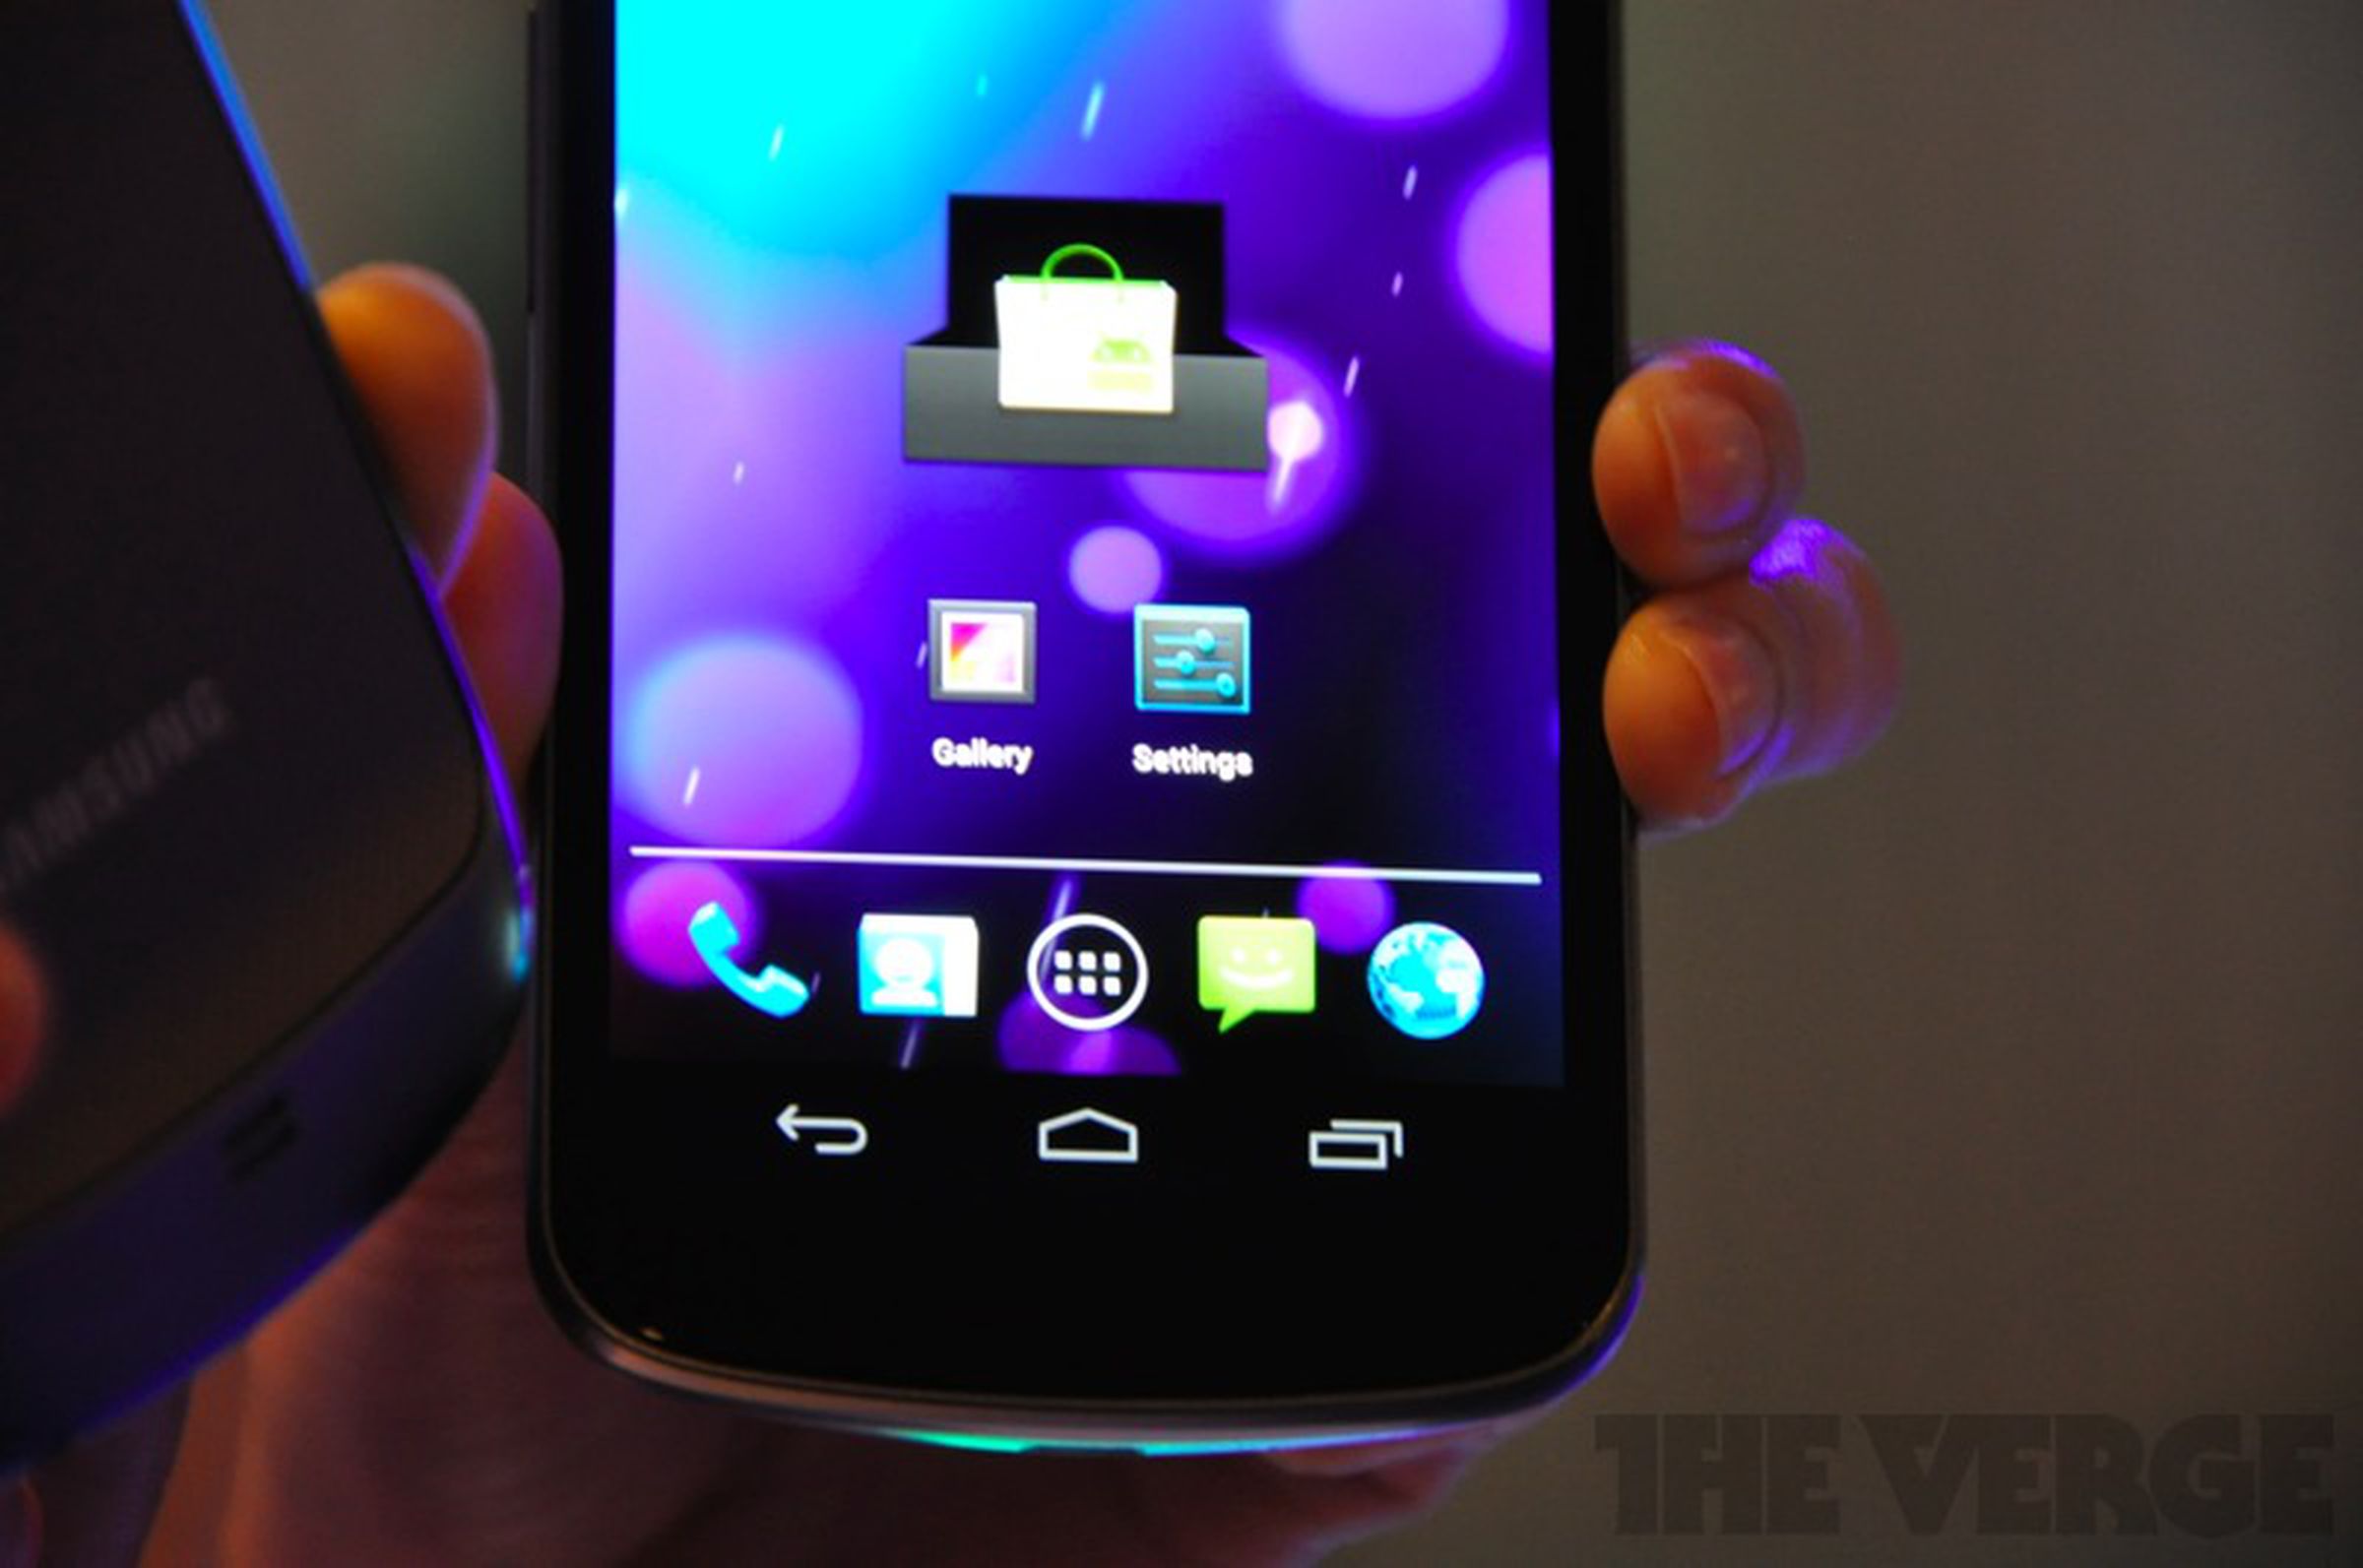 Galaxy Nexus with Ice Cream Sandwich: pictures, video, and hands-on